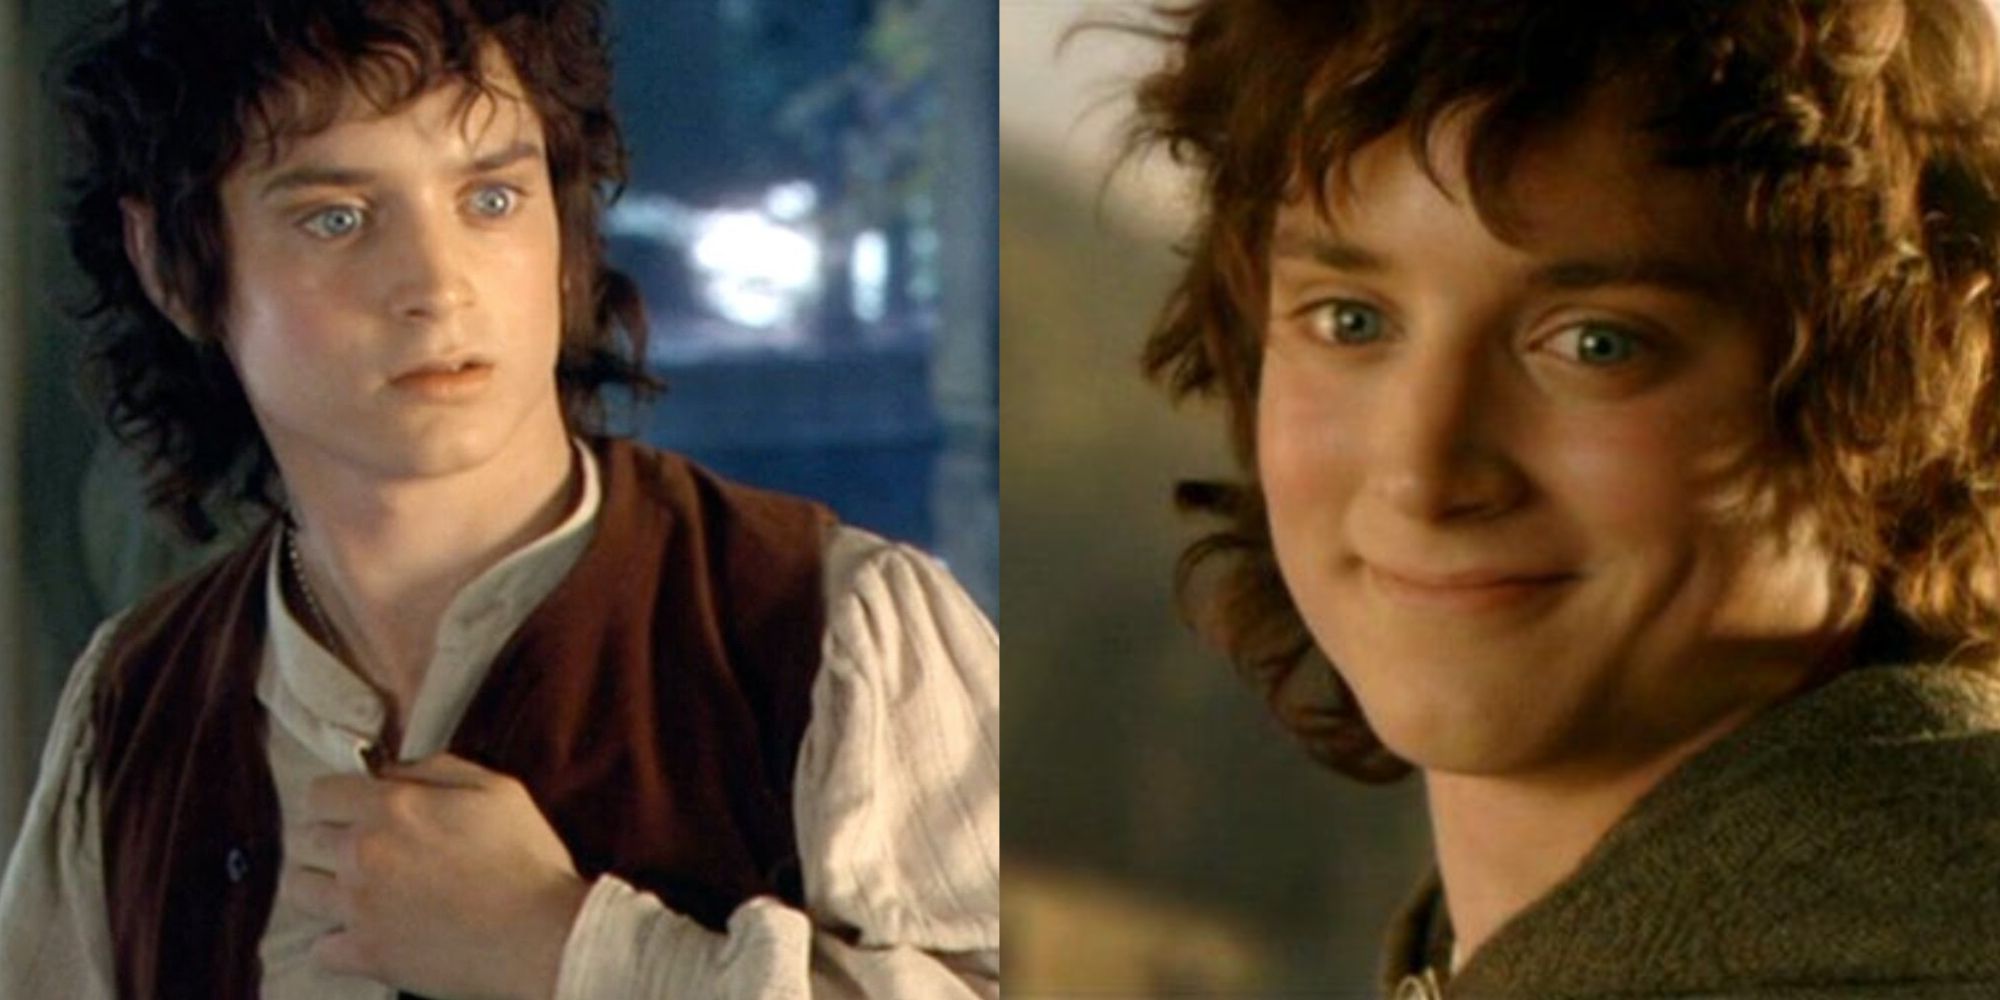 Split images of Frodo looking scared and Frodo smiling in The Lord of the Rings